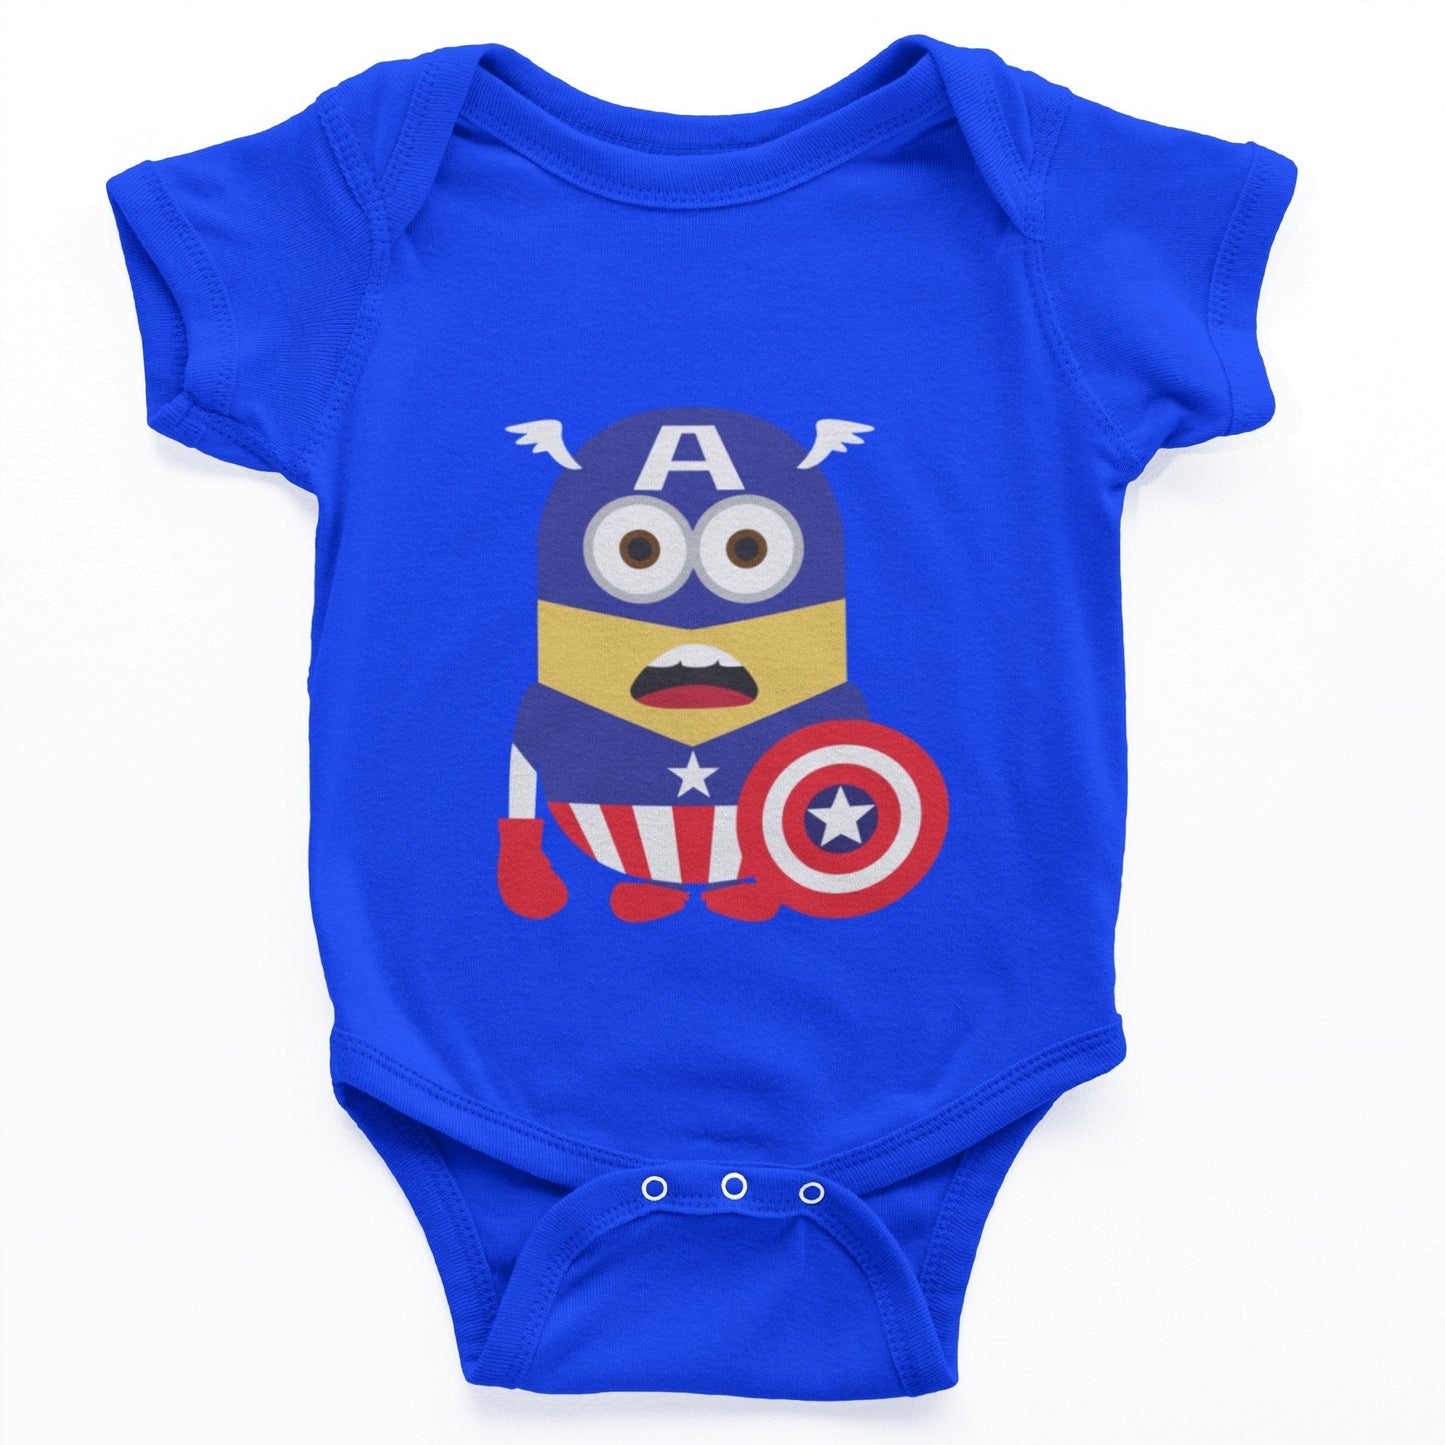 thelegalgang,Captain America Graphic Onesies for Babies,.